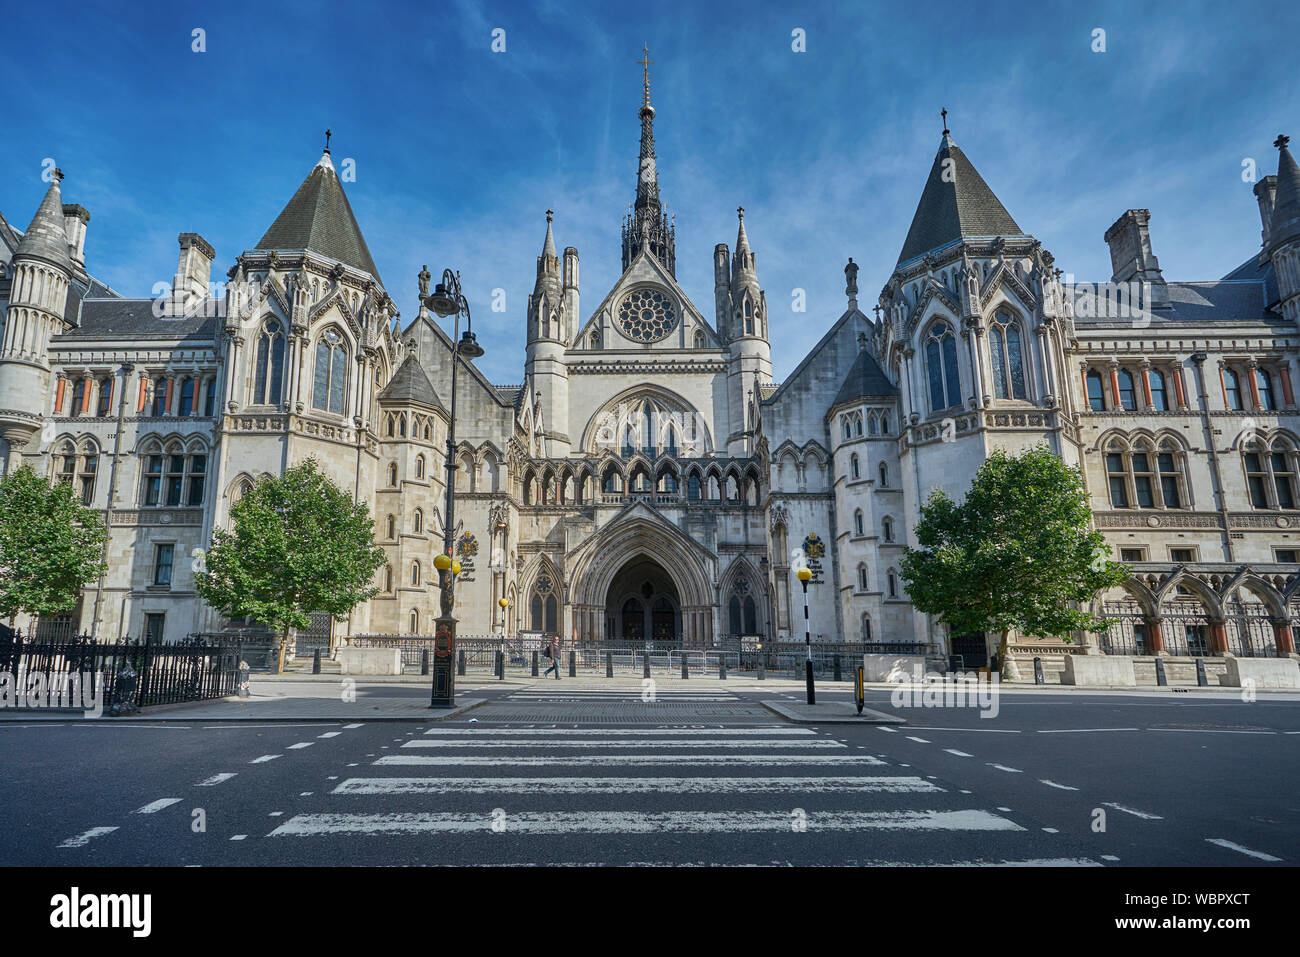 The royal courts of justice London.  The high court. Stock Photo